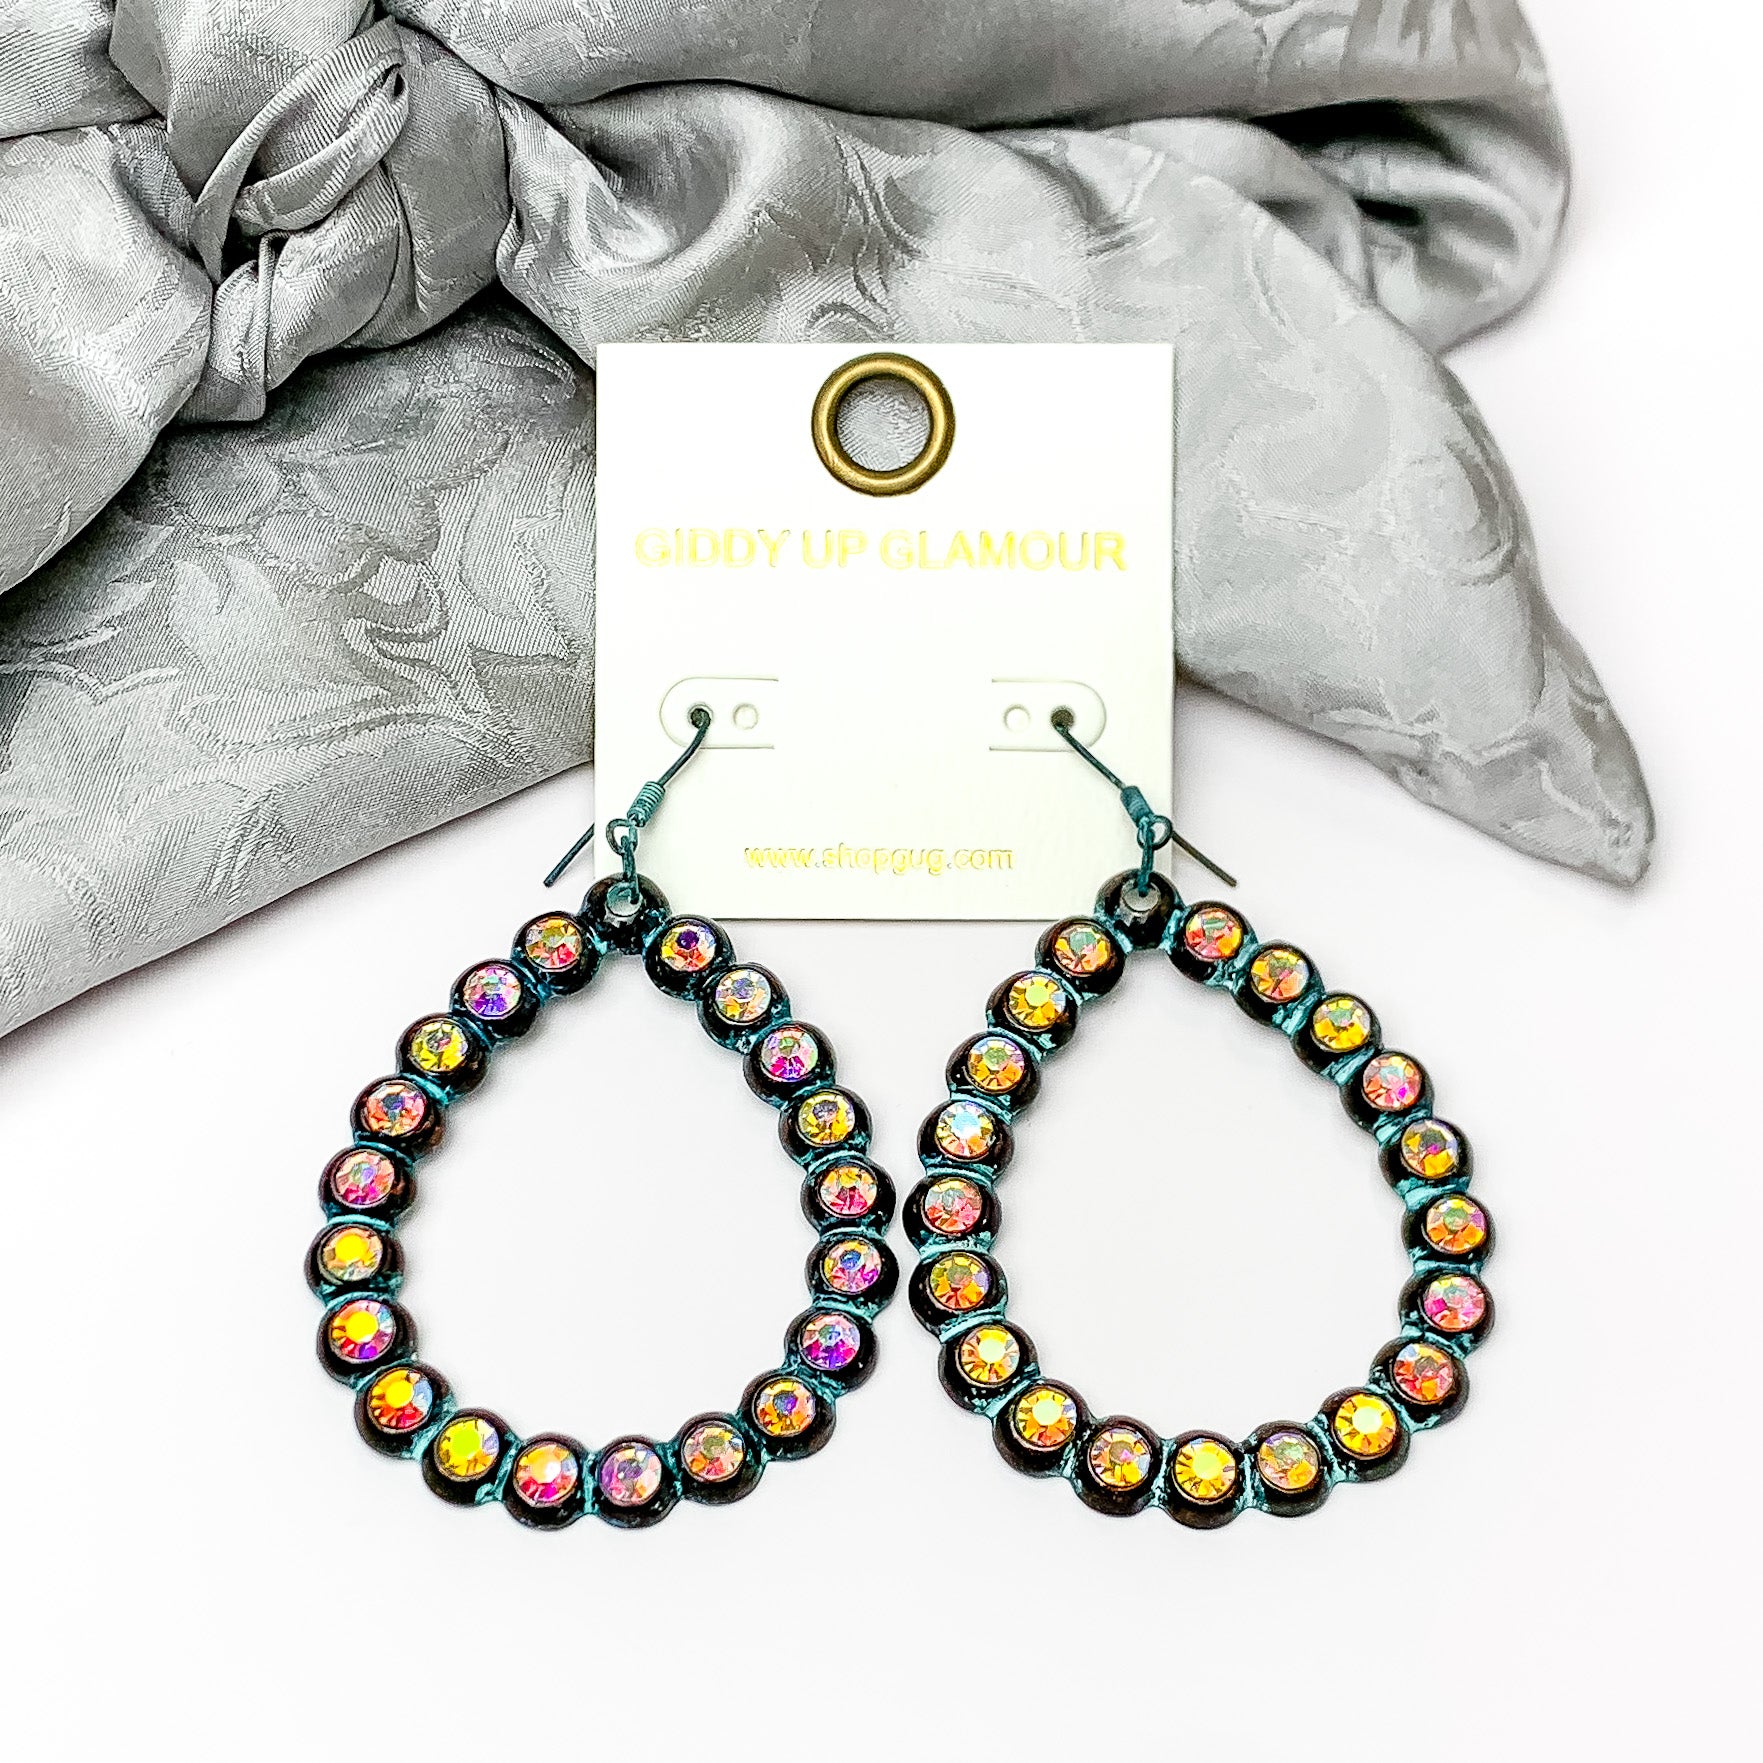 Open Teardrop Earrings with AB Crystal Outline in Patina. Pictured on a white background with sliver fabric at the top.